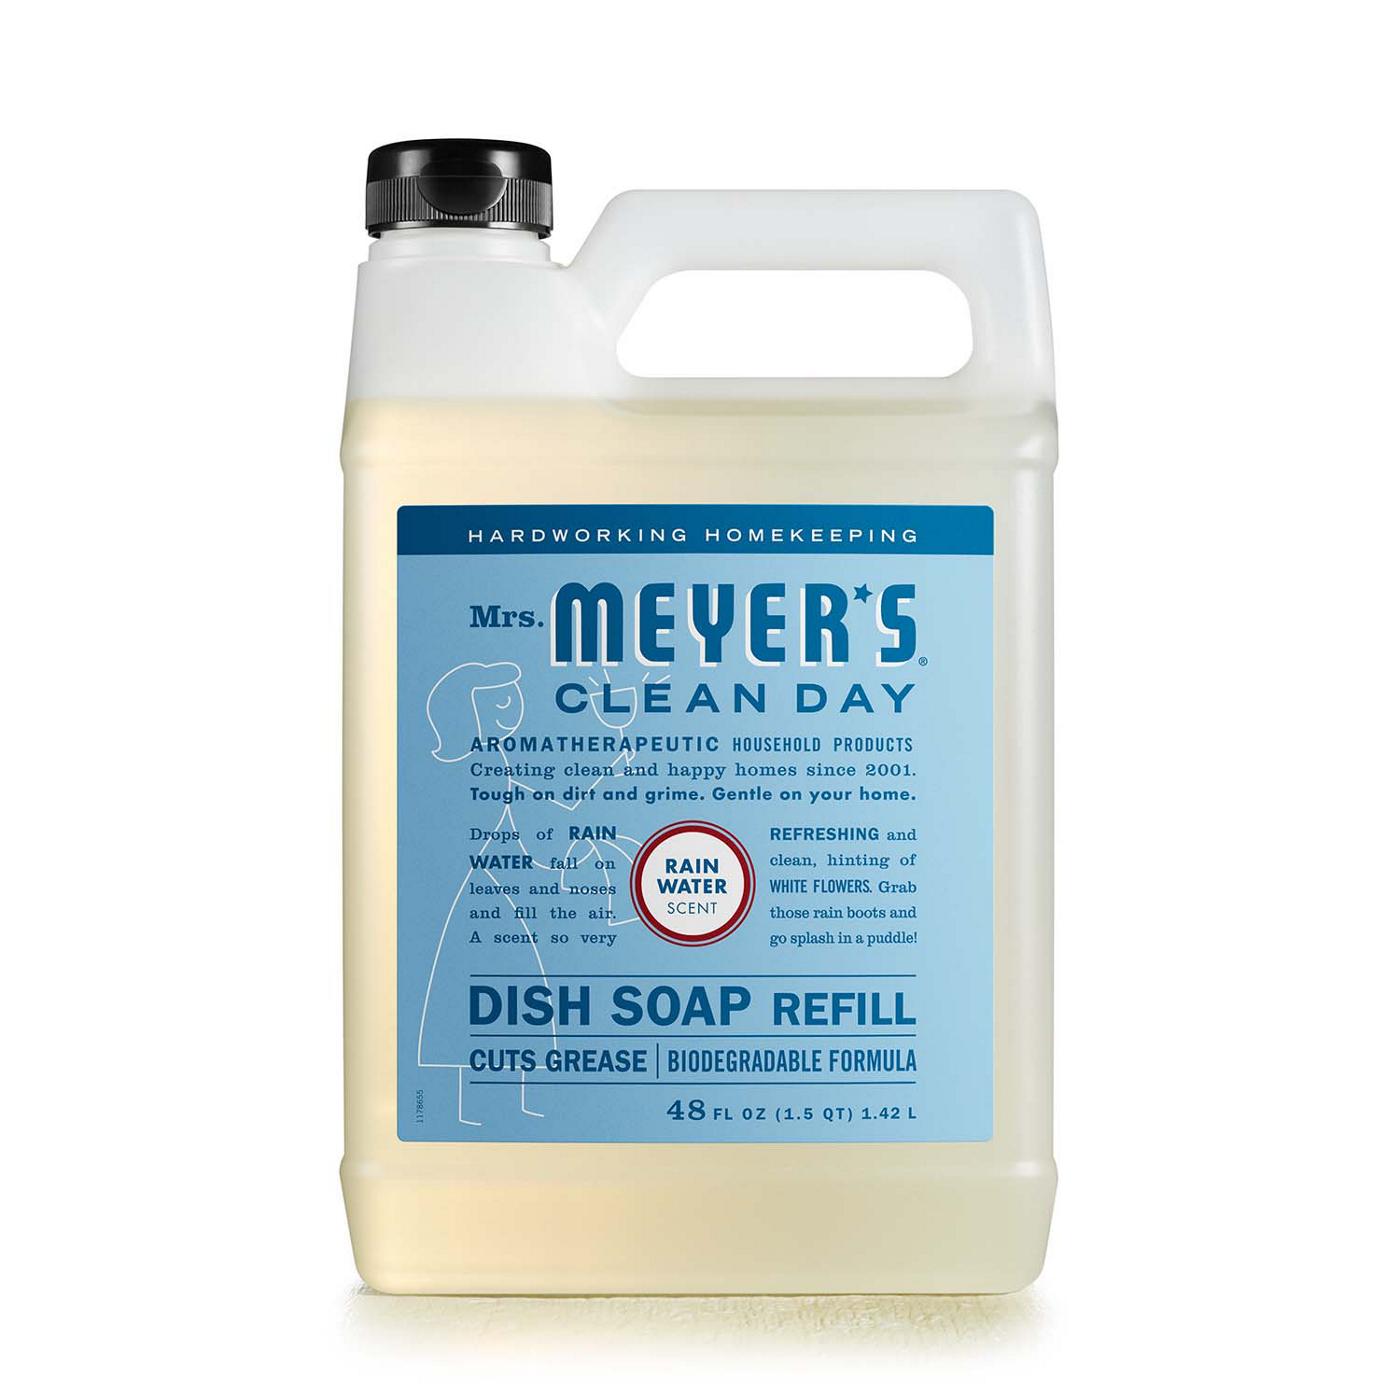 Mrs. Meyer's Clean Day Rainwater Dish Soap Refill; image 1 of 6